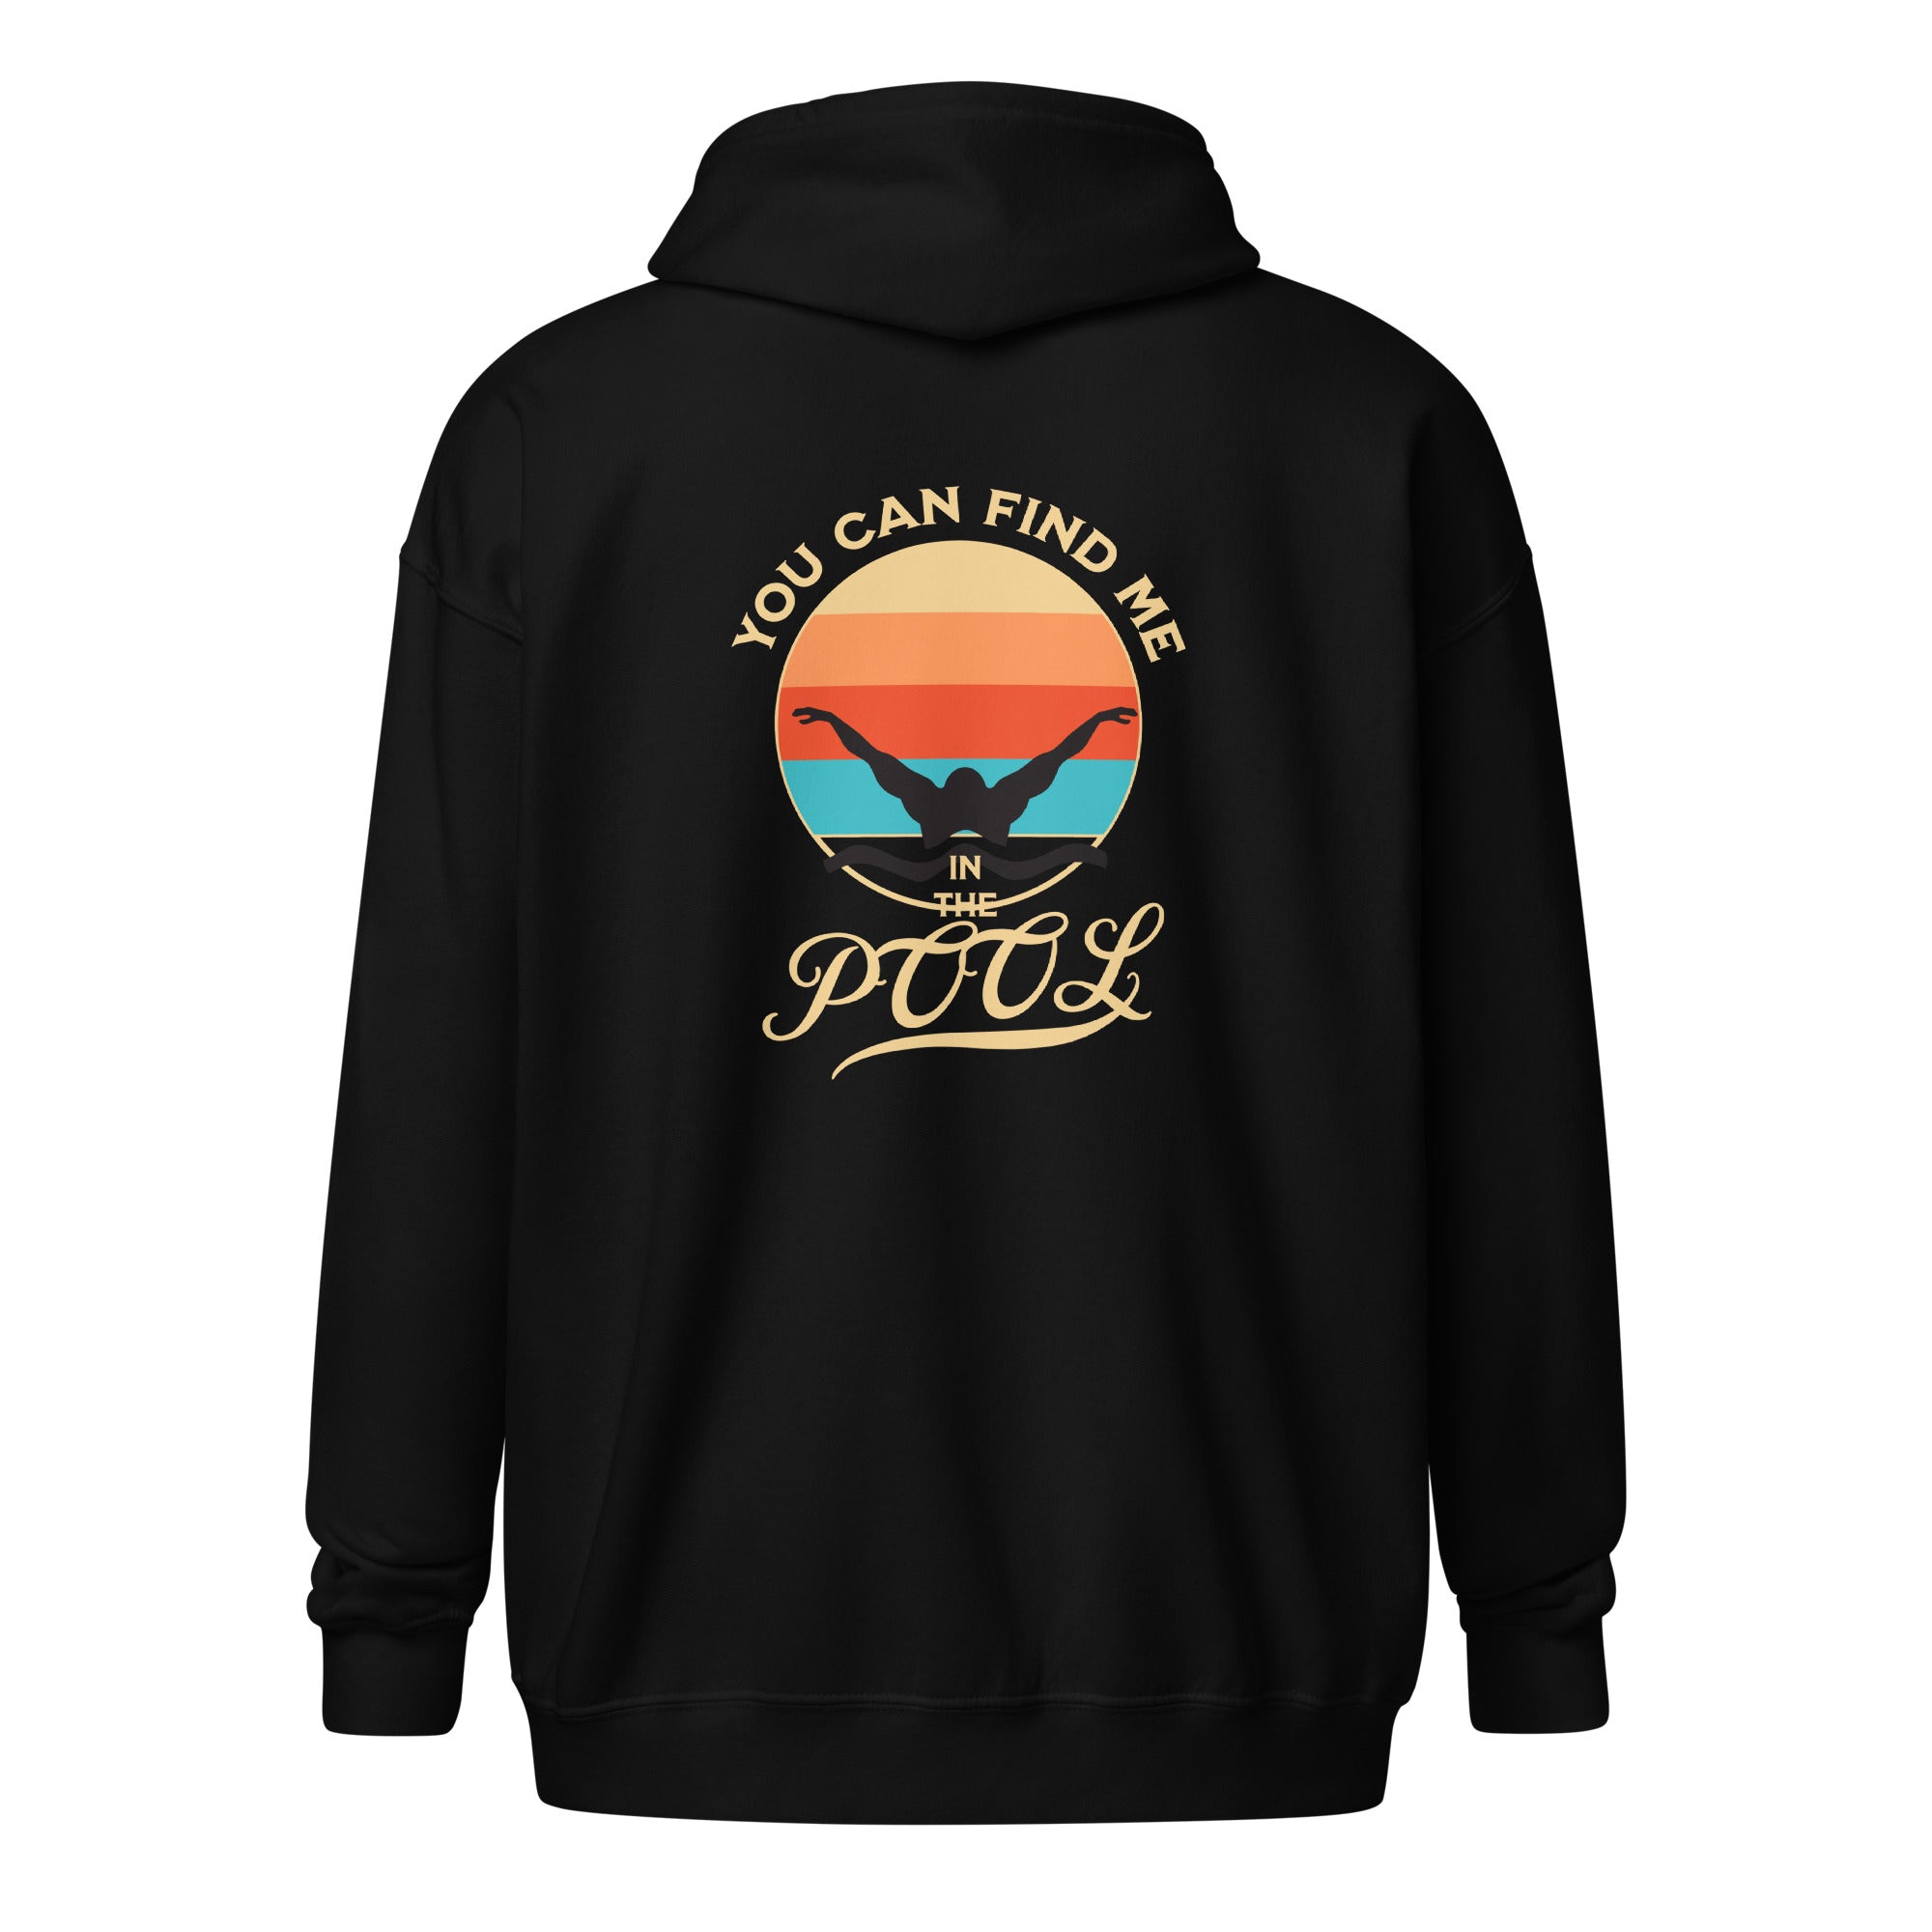 "You Can Find Me In The Pool" blend zip hoodie